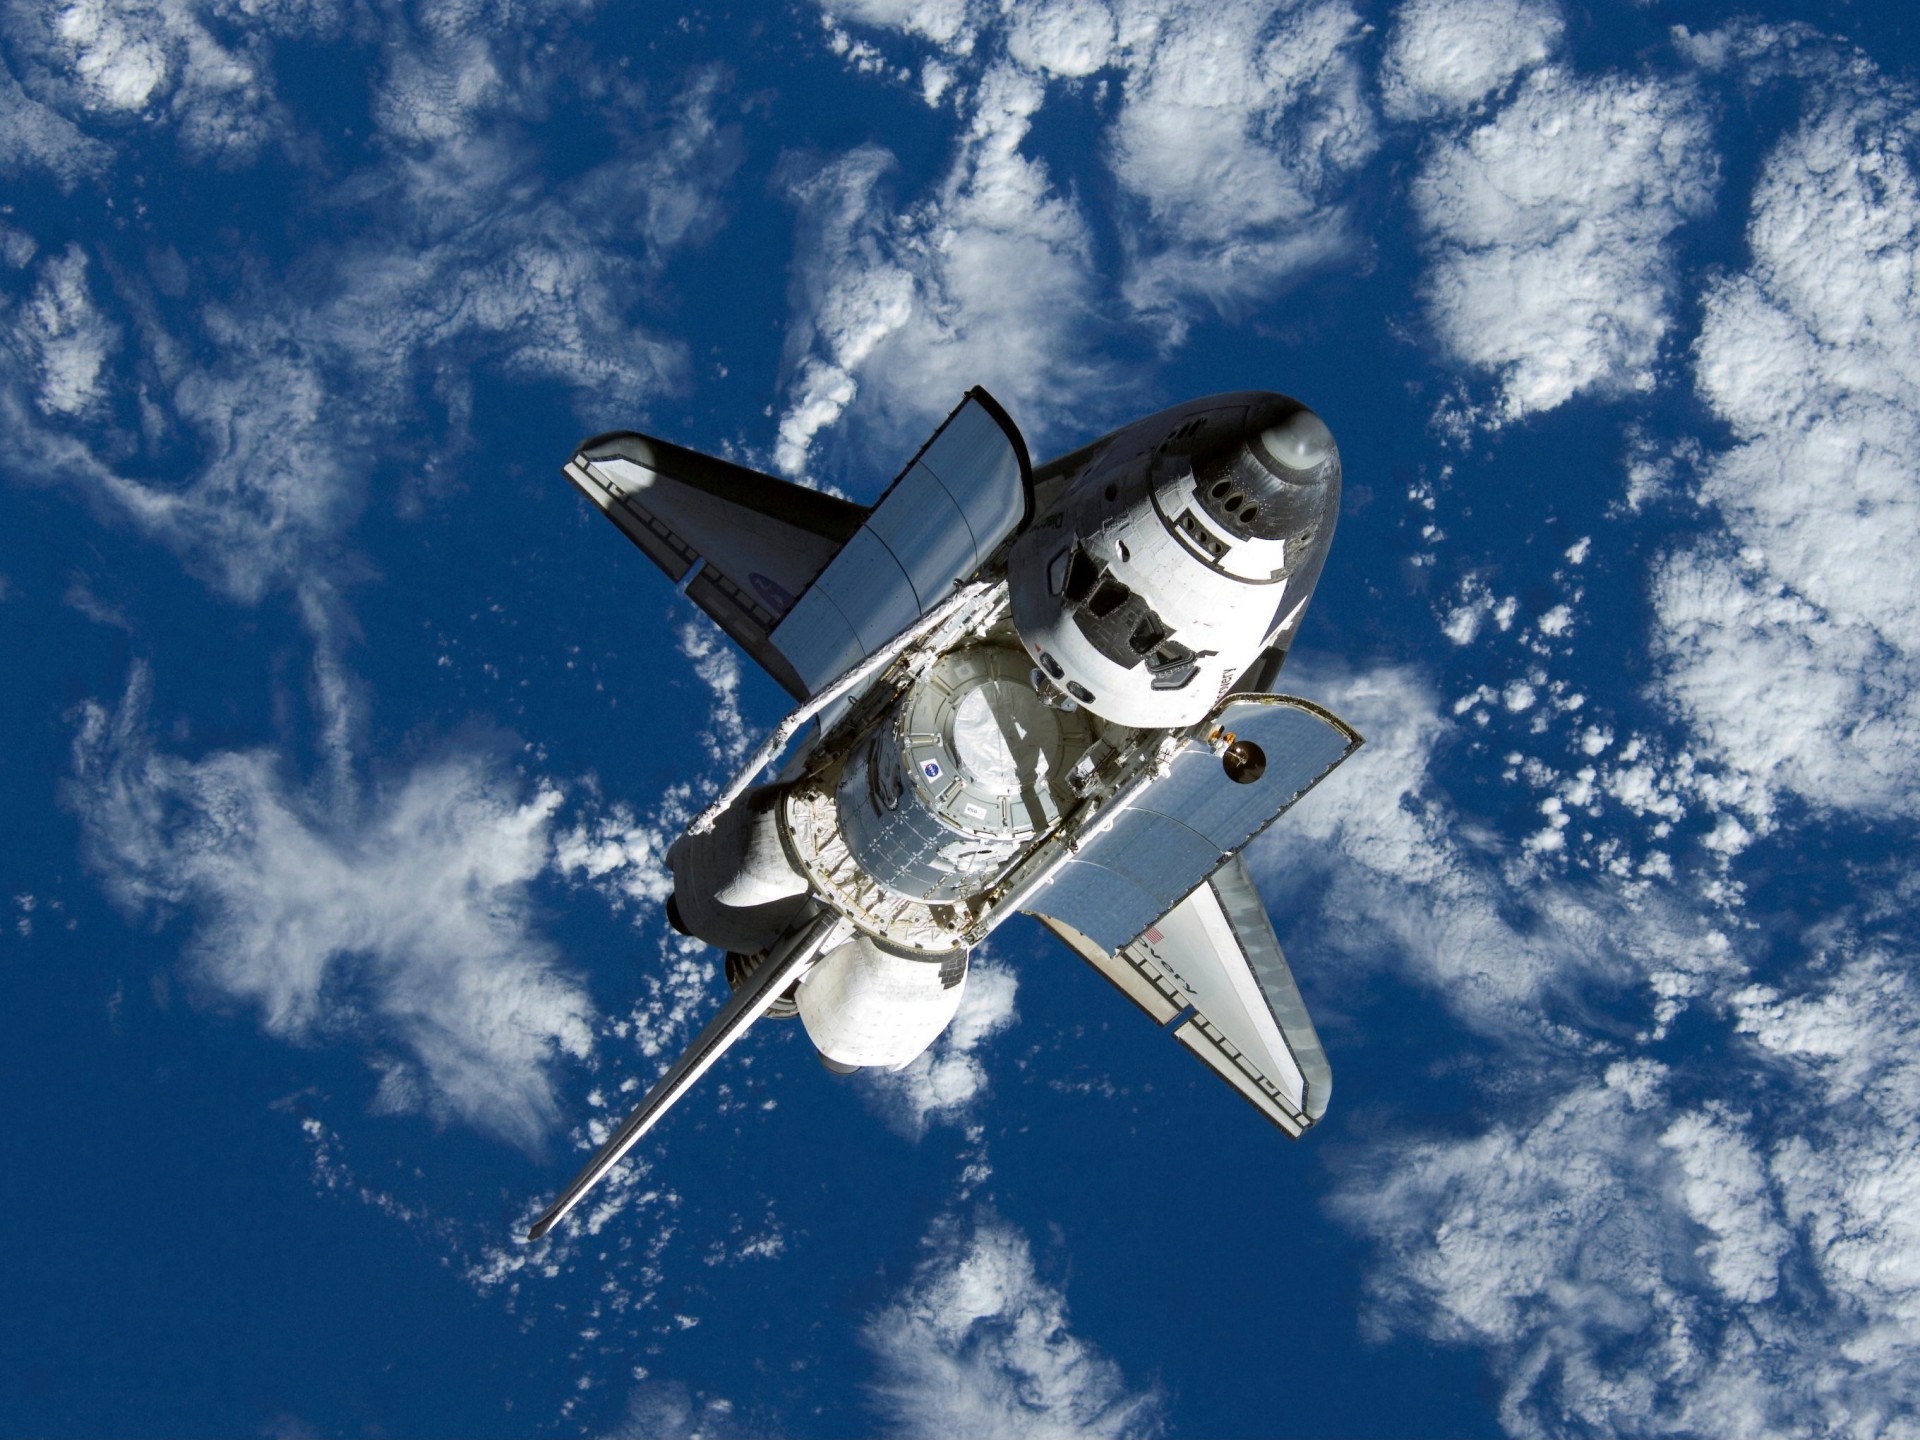 Space Shuttle Mission Sts 120 HD Wallpaper, Wallpaper13.com